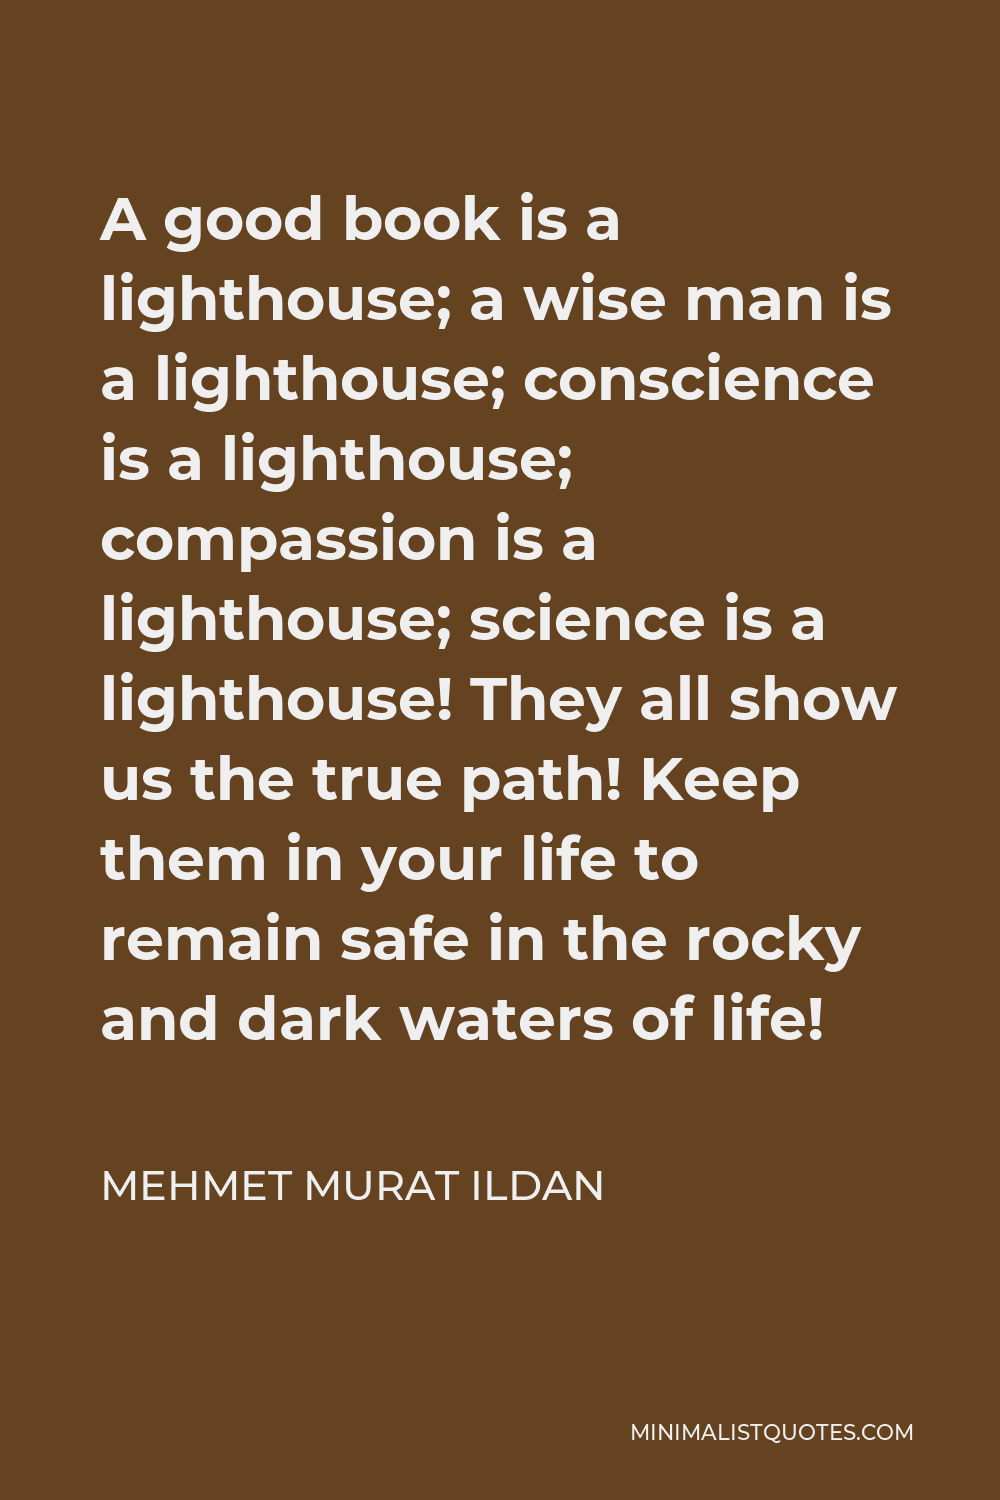 Mehmet Murat Ildan Quote - A good book is a lighthouse; a wise man is a lighthouse; conscience is a lighthouse; compassion is a lighthouse; science is a lighthouse! They all show us the true path! Keep them in your life to remain safe in the rocky and dark waters of life!